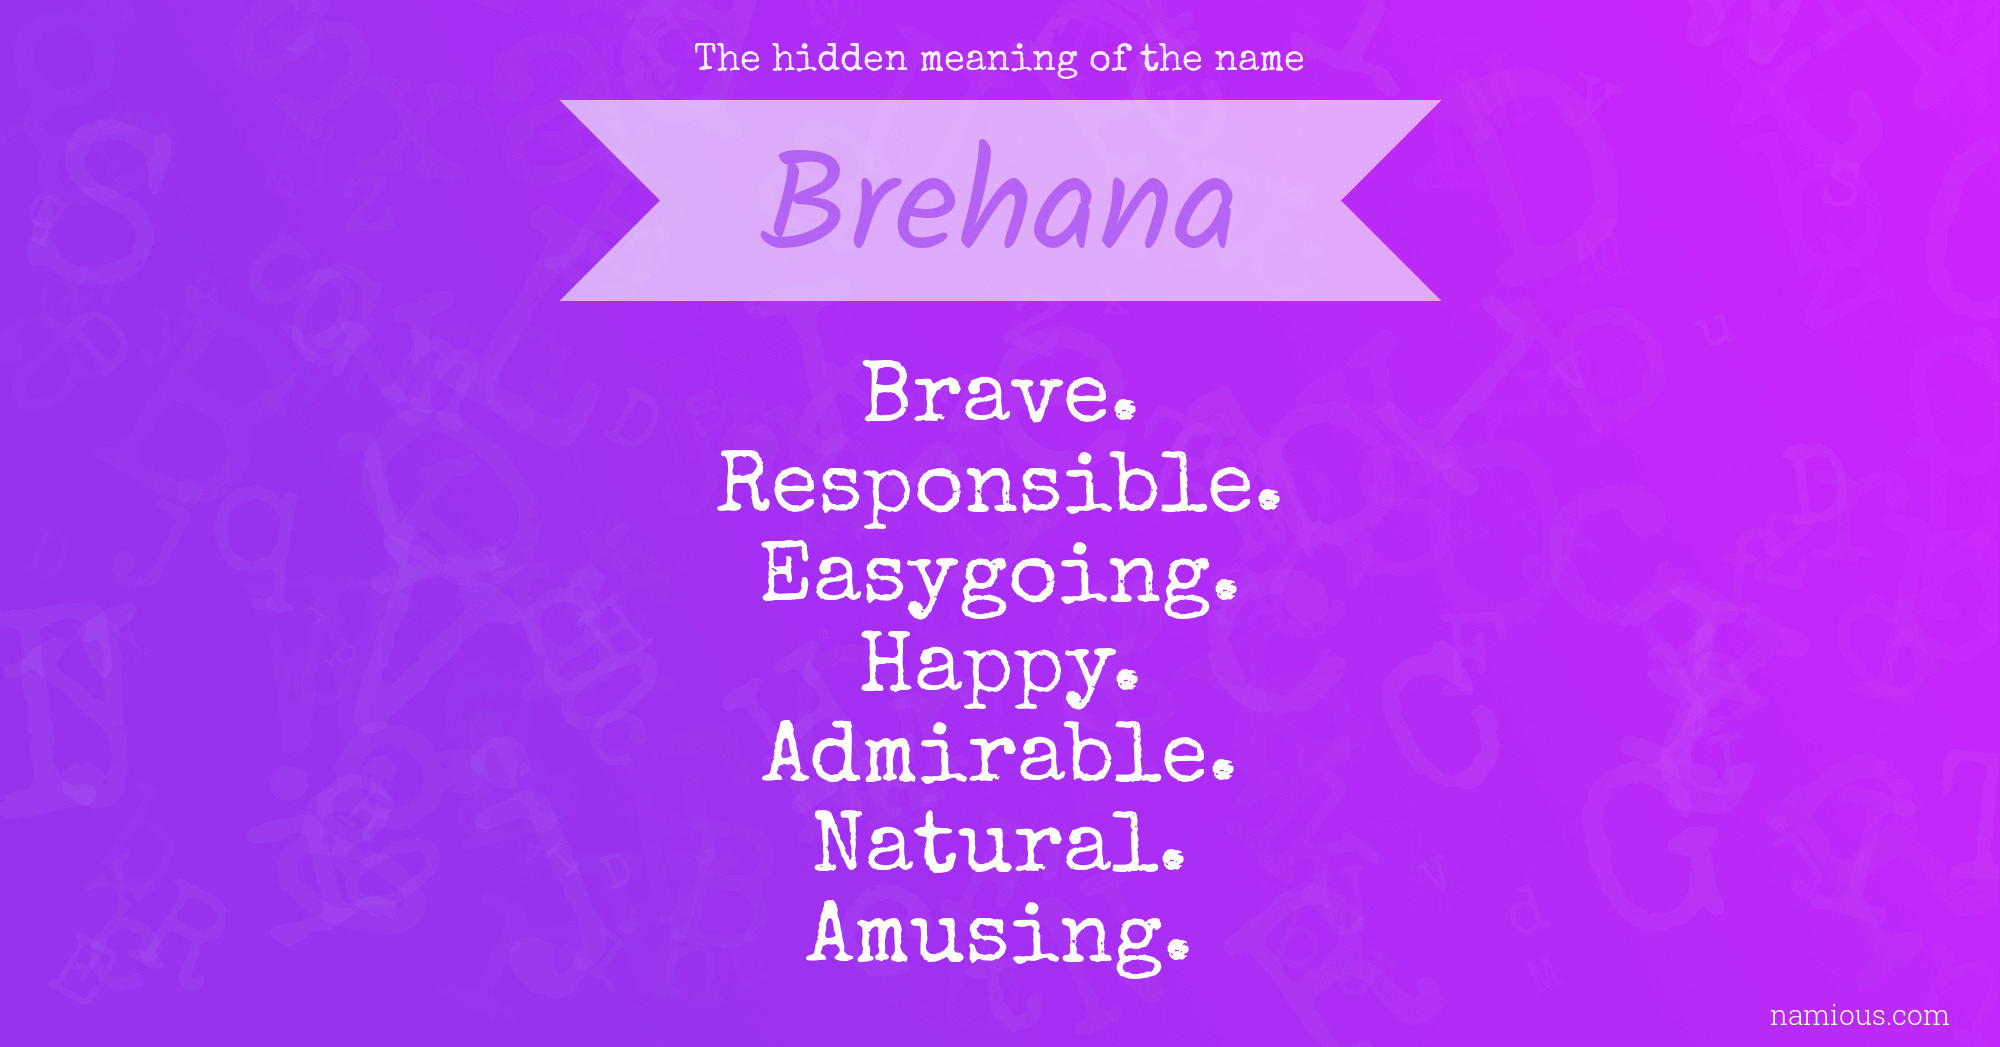 The hidden meaning of the name Brehana